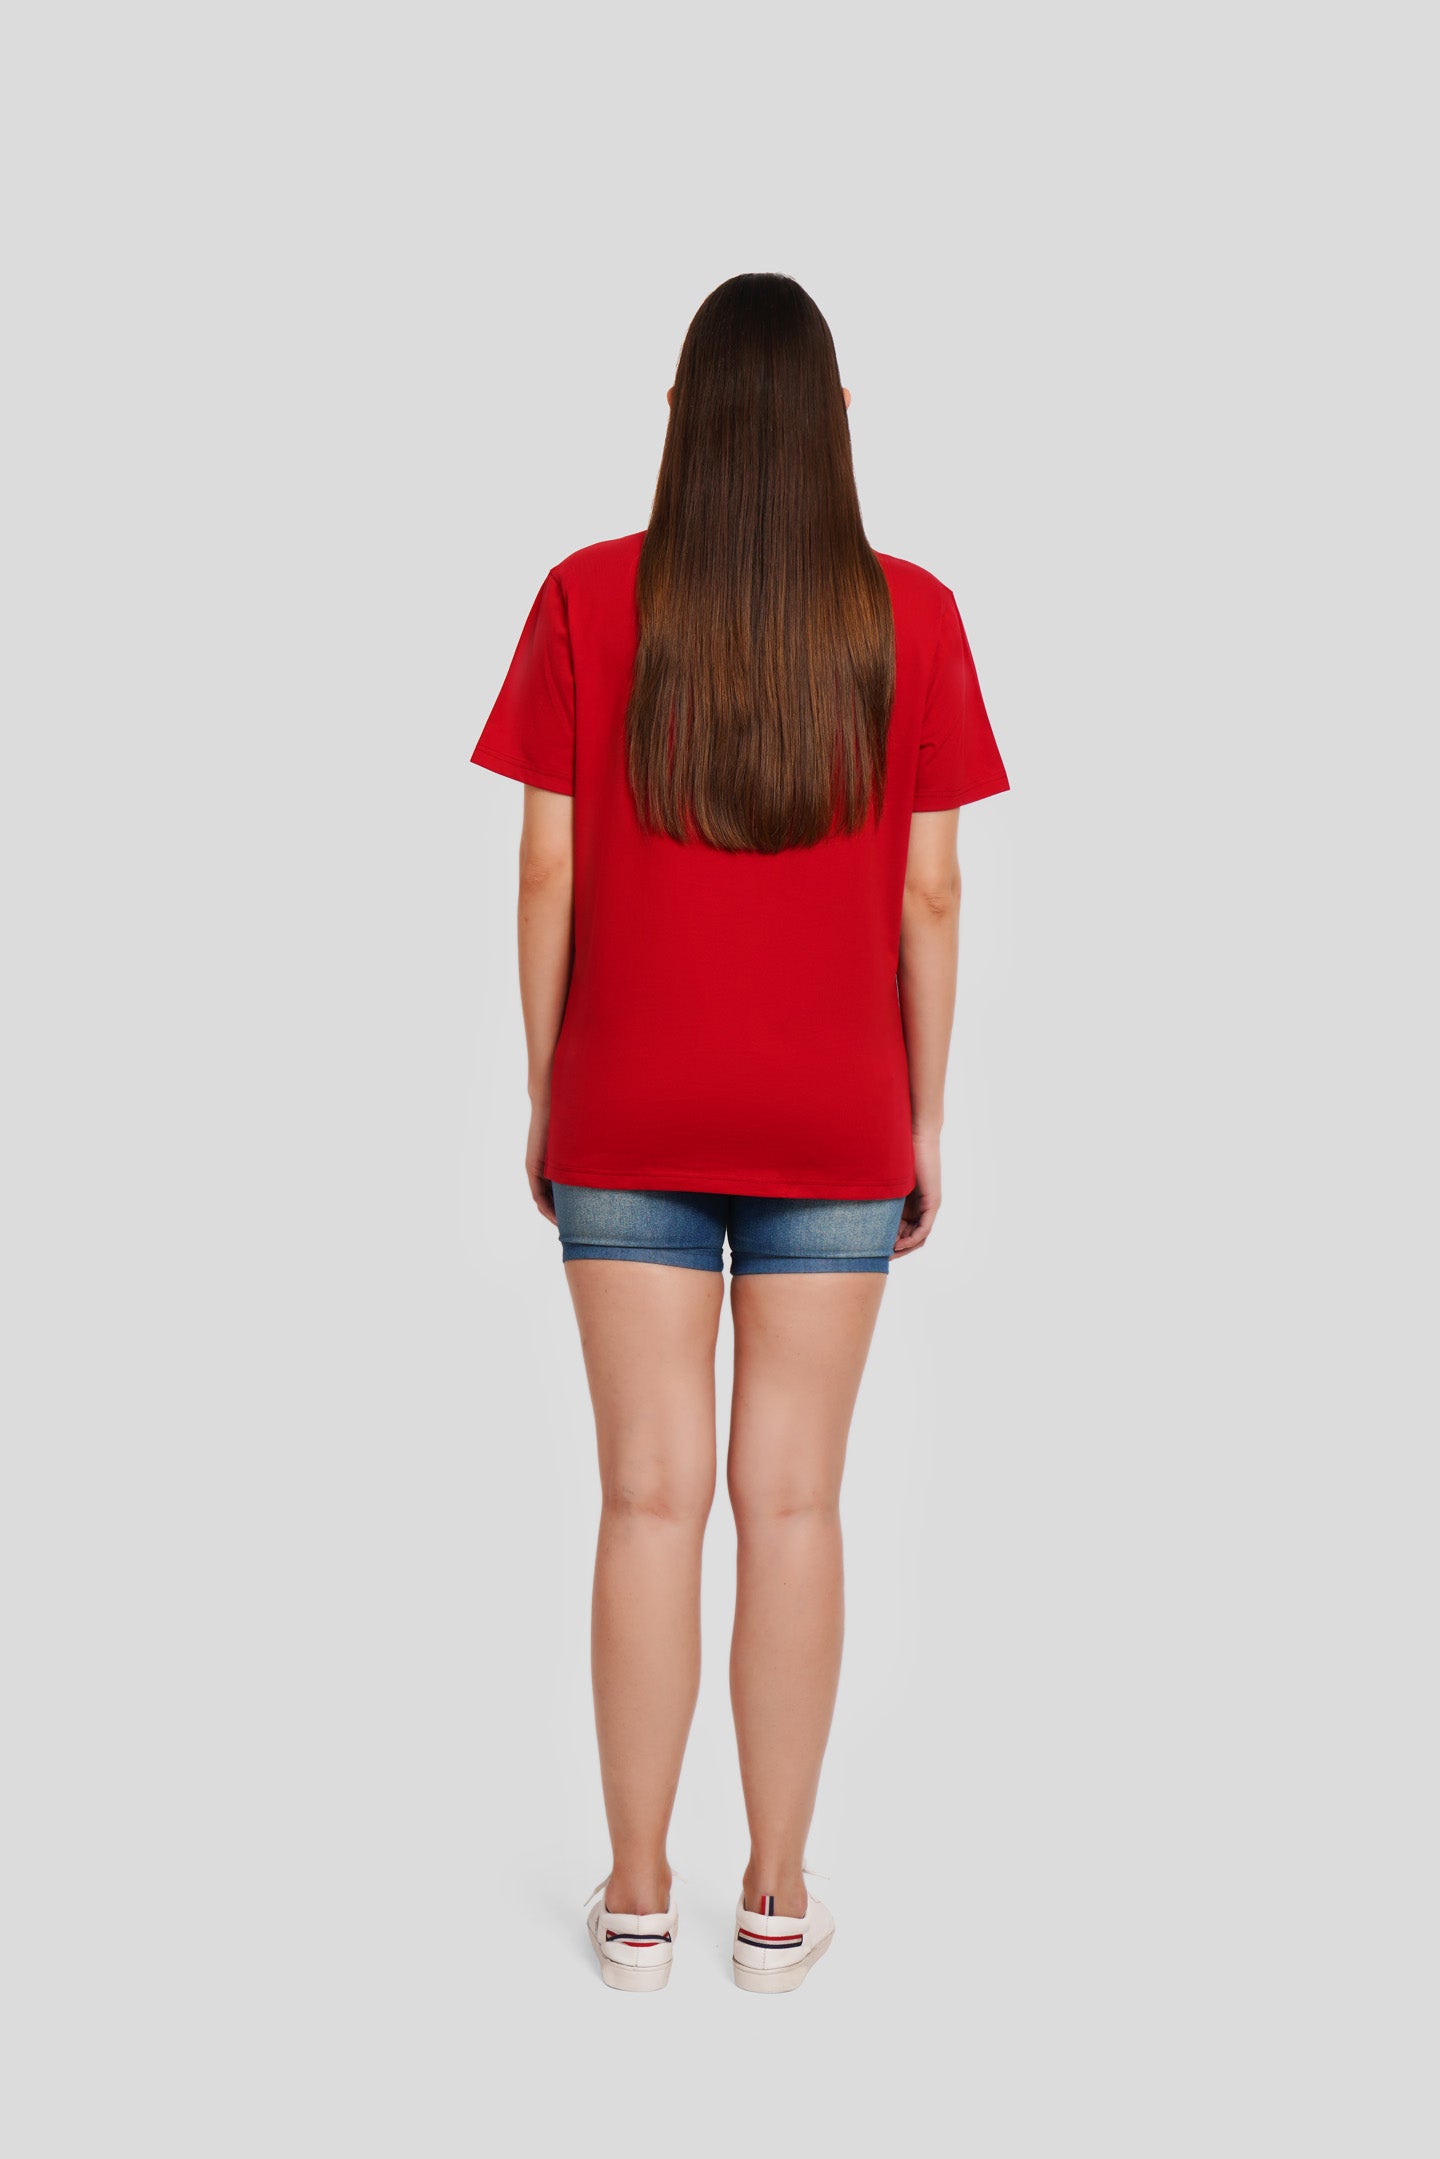 Head Banger Red Printed T Shirt Women Boyfriend Fit With Front Design Pic 4